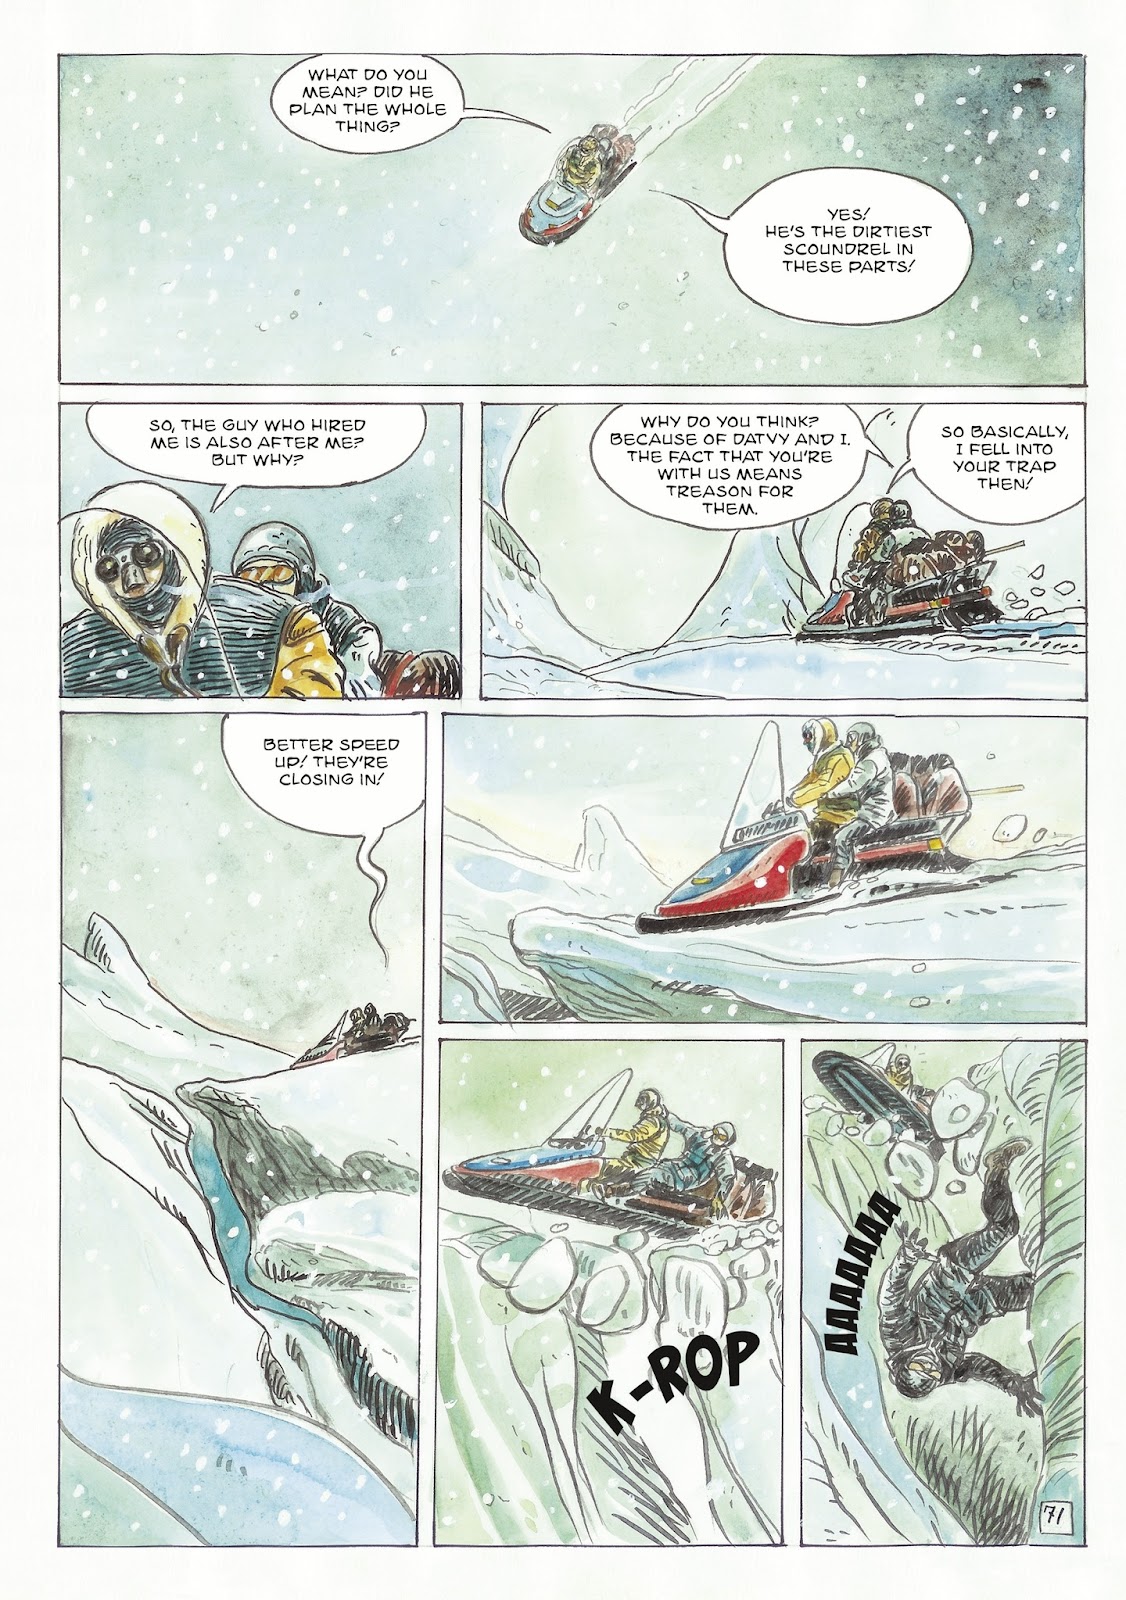 The Man With the Bear issue 2 - Page 17